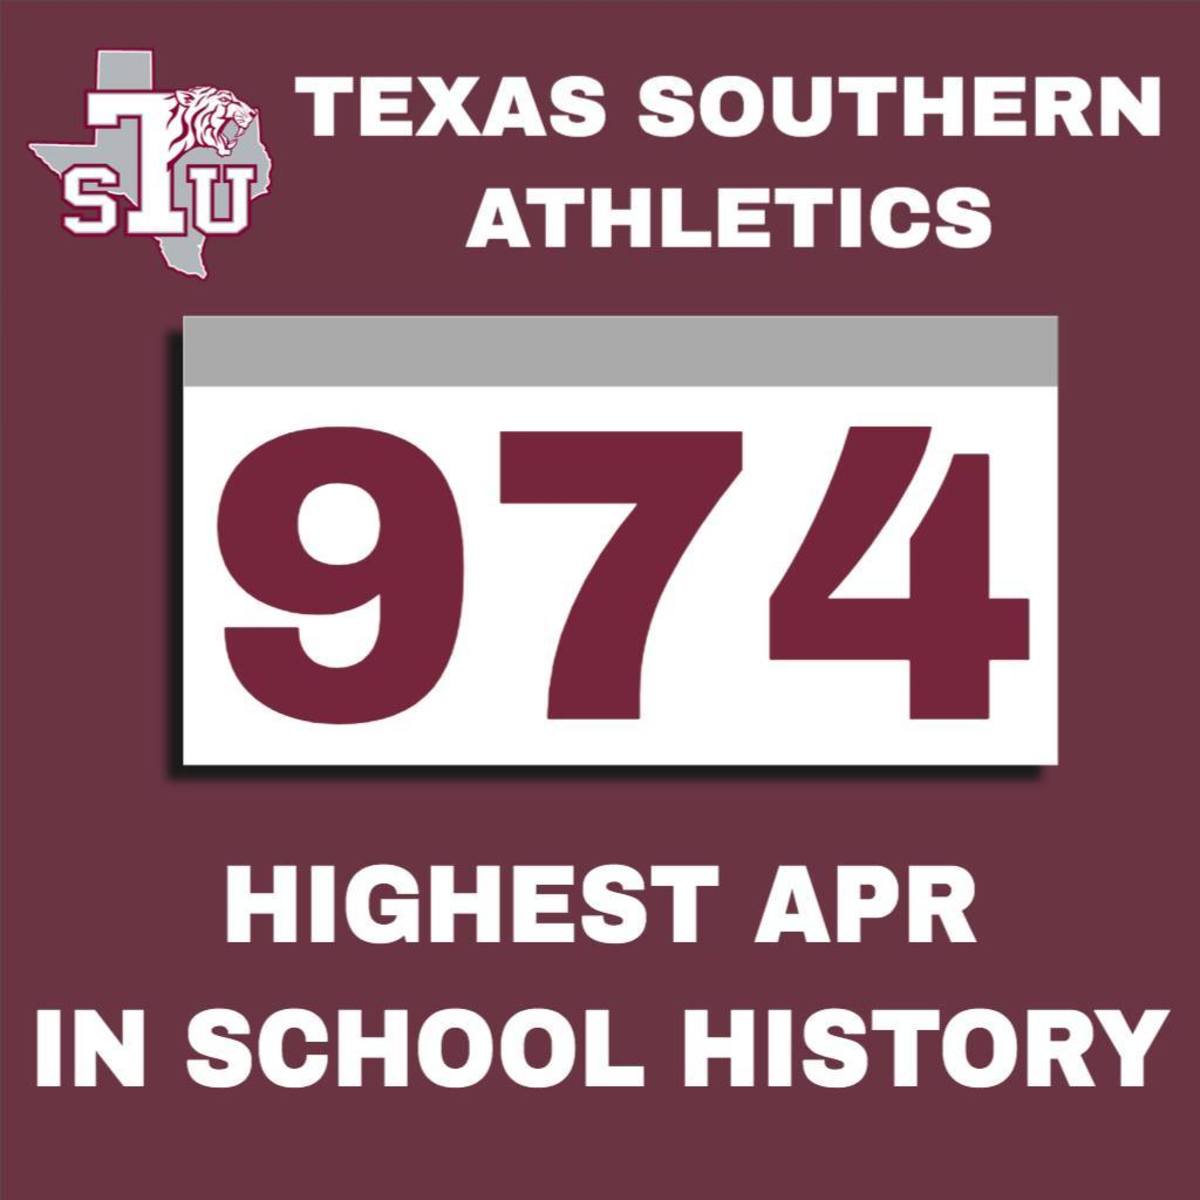 Texas Southern's Highest APR 974